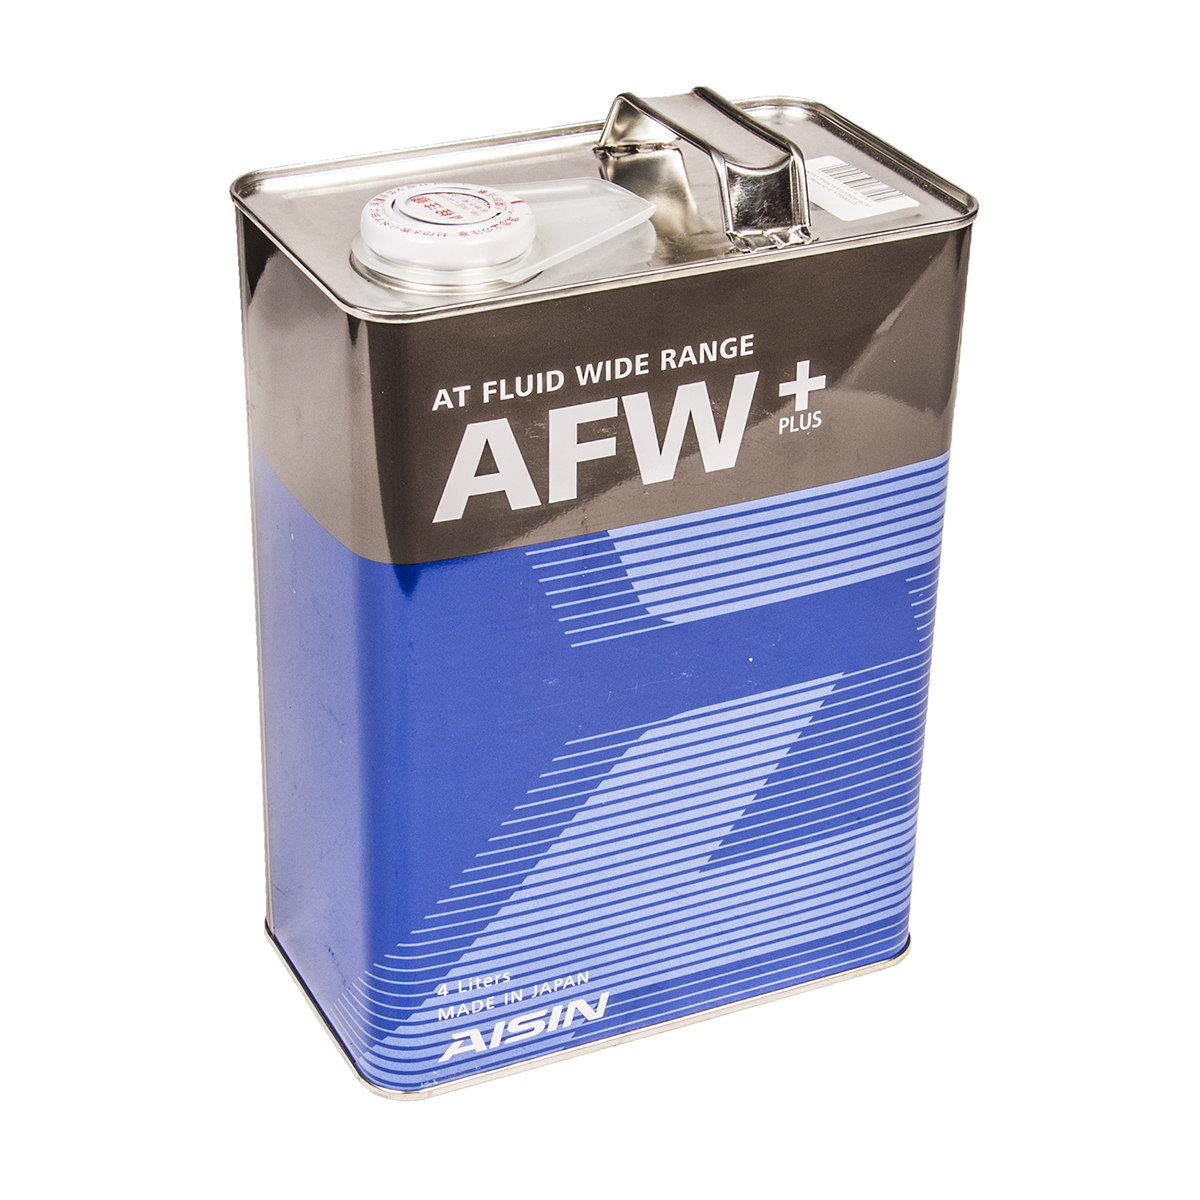 Atf afw. ATF 6004 4л Айсин. ATF wide range AFW+ 4л. Масло AISIN AFW+ atf6004. AISIN ATF-9004.